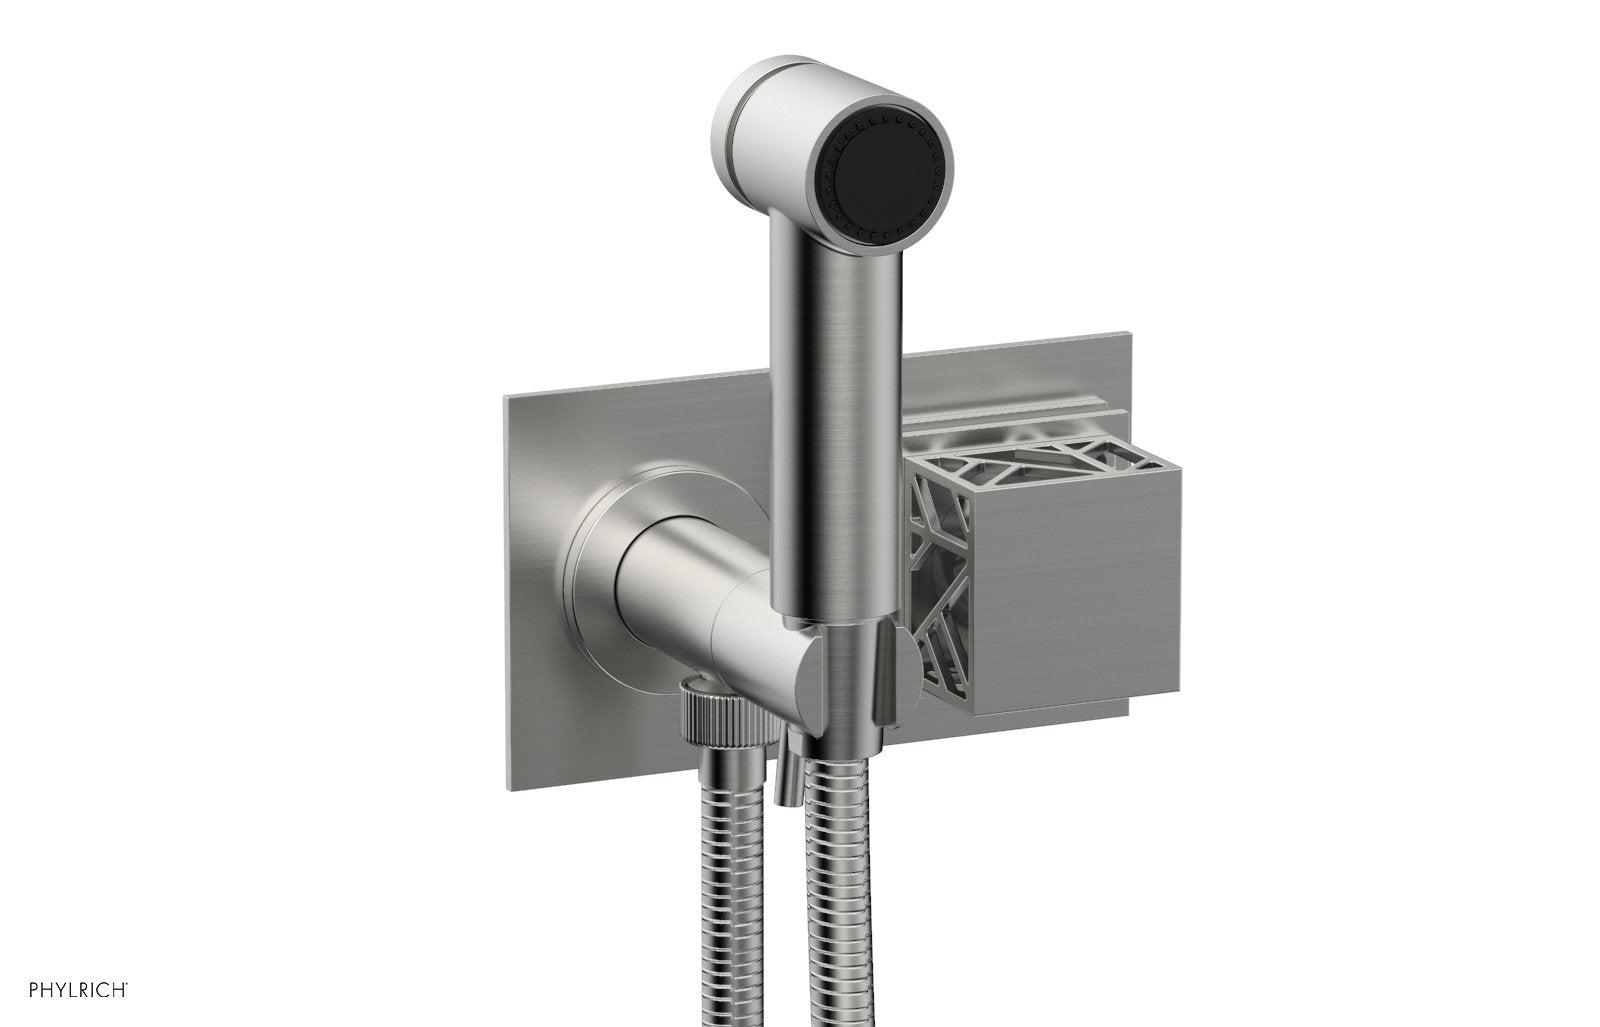 Phylrich JOLIE Wall Mounted Bidet, Square Handle with "Grey" Accents